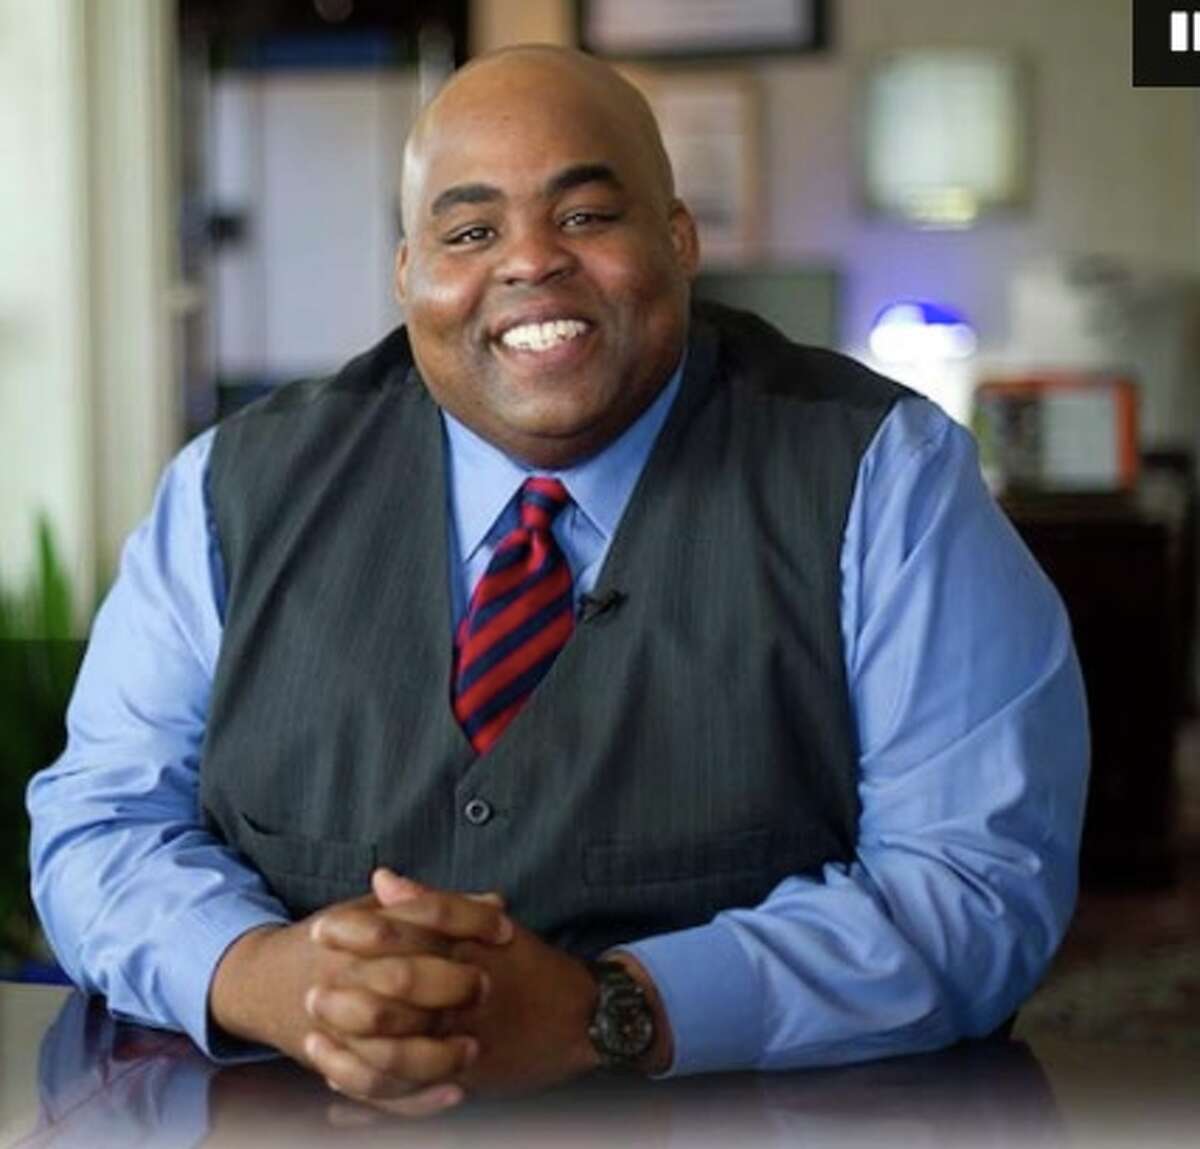 A. Marcus Nelson, superintendent from June 2009 to April 2017